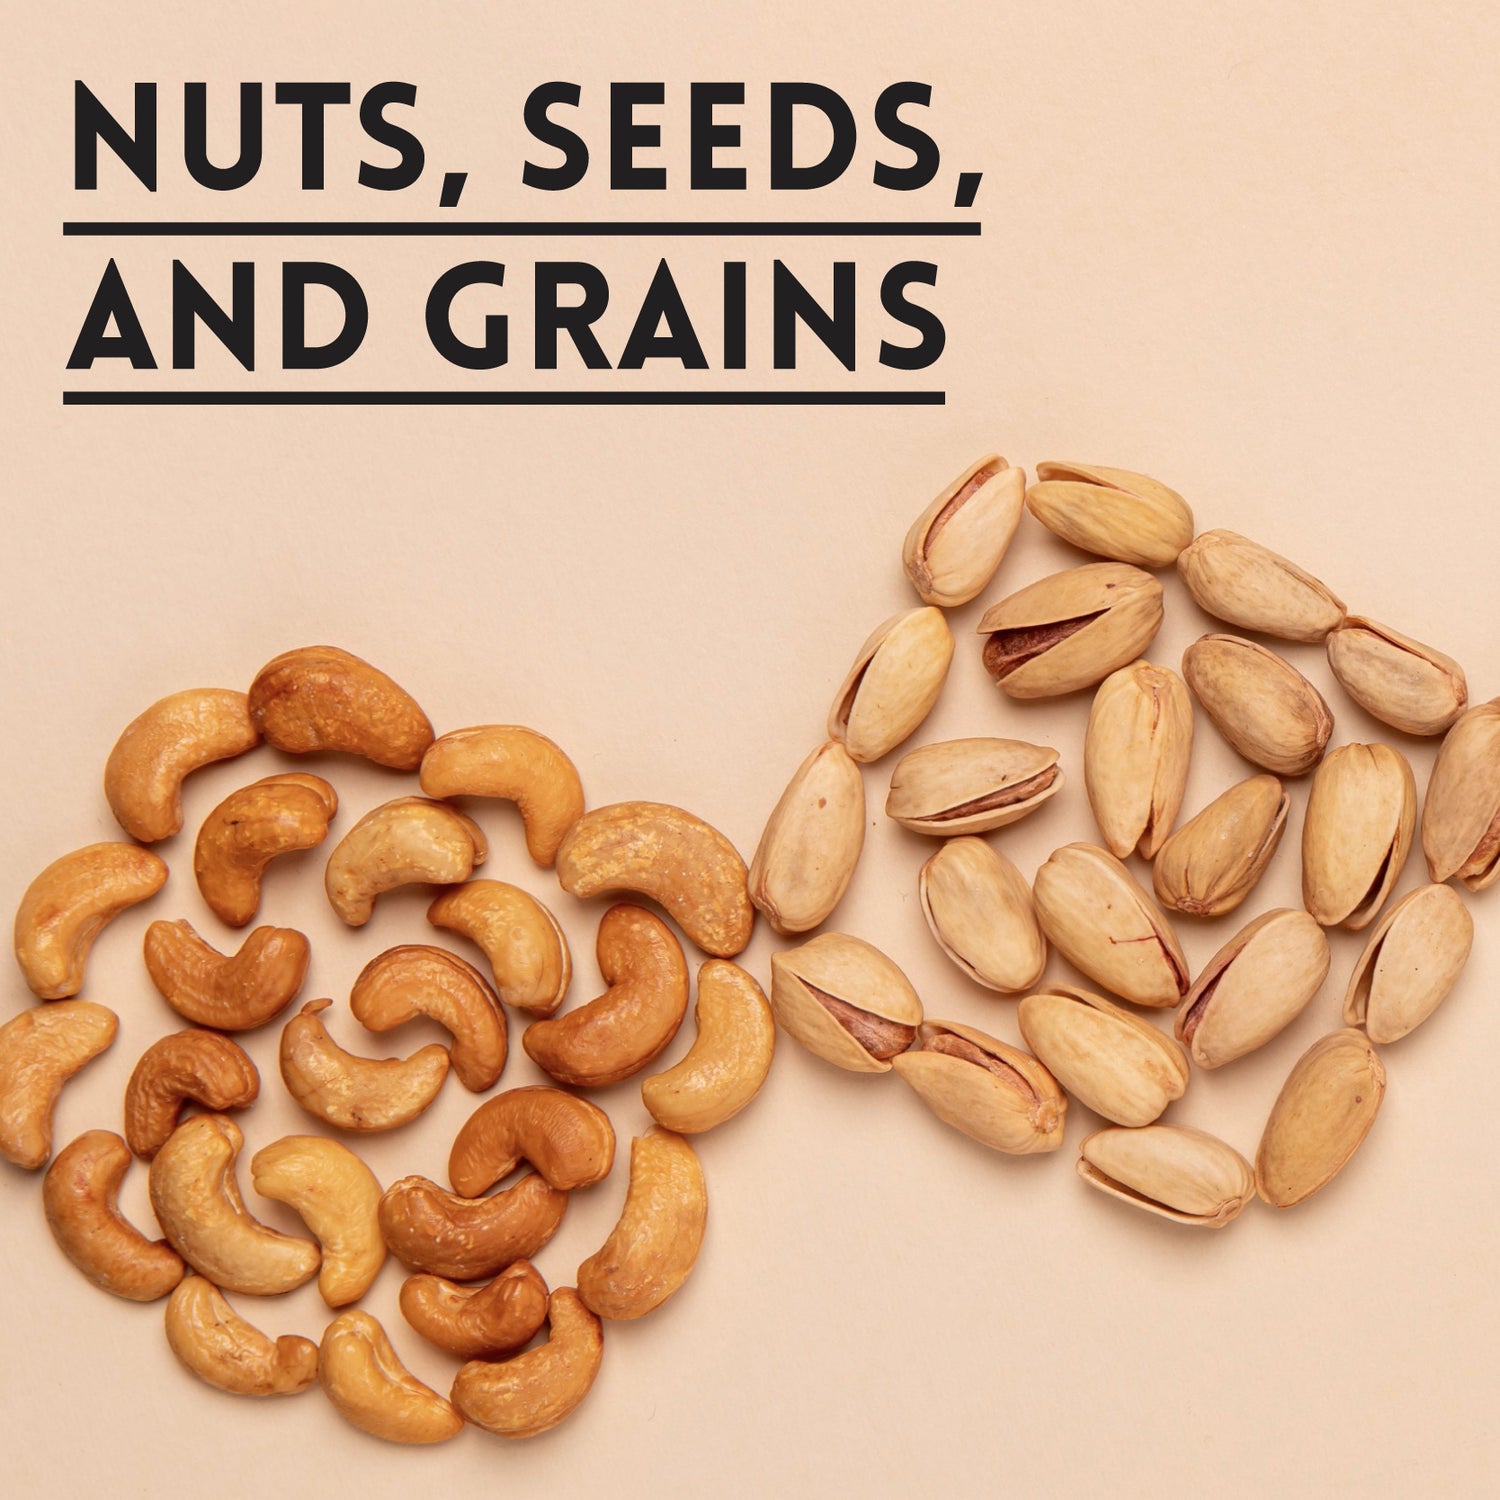 Nuts, Seeds, and Grains